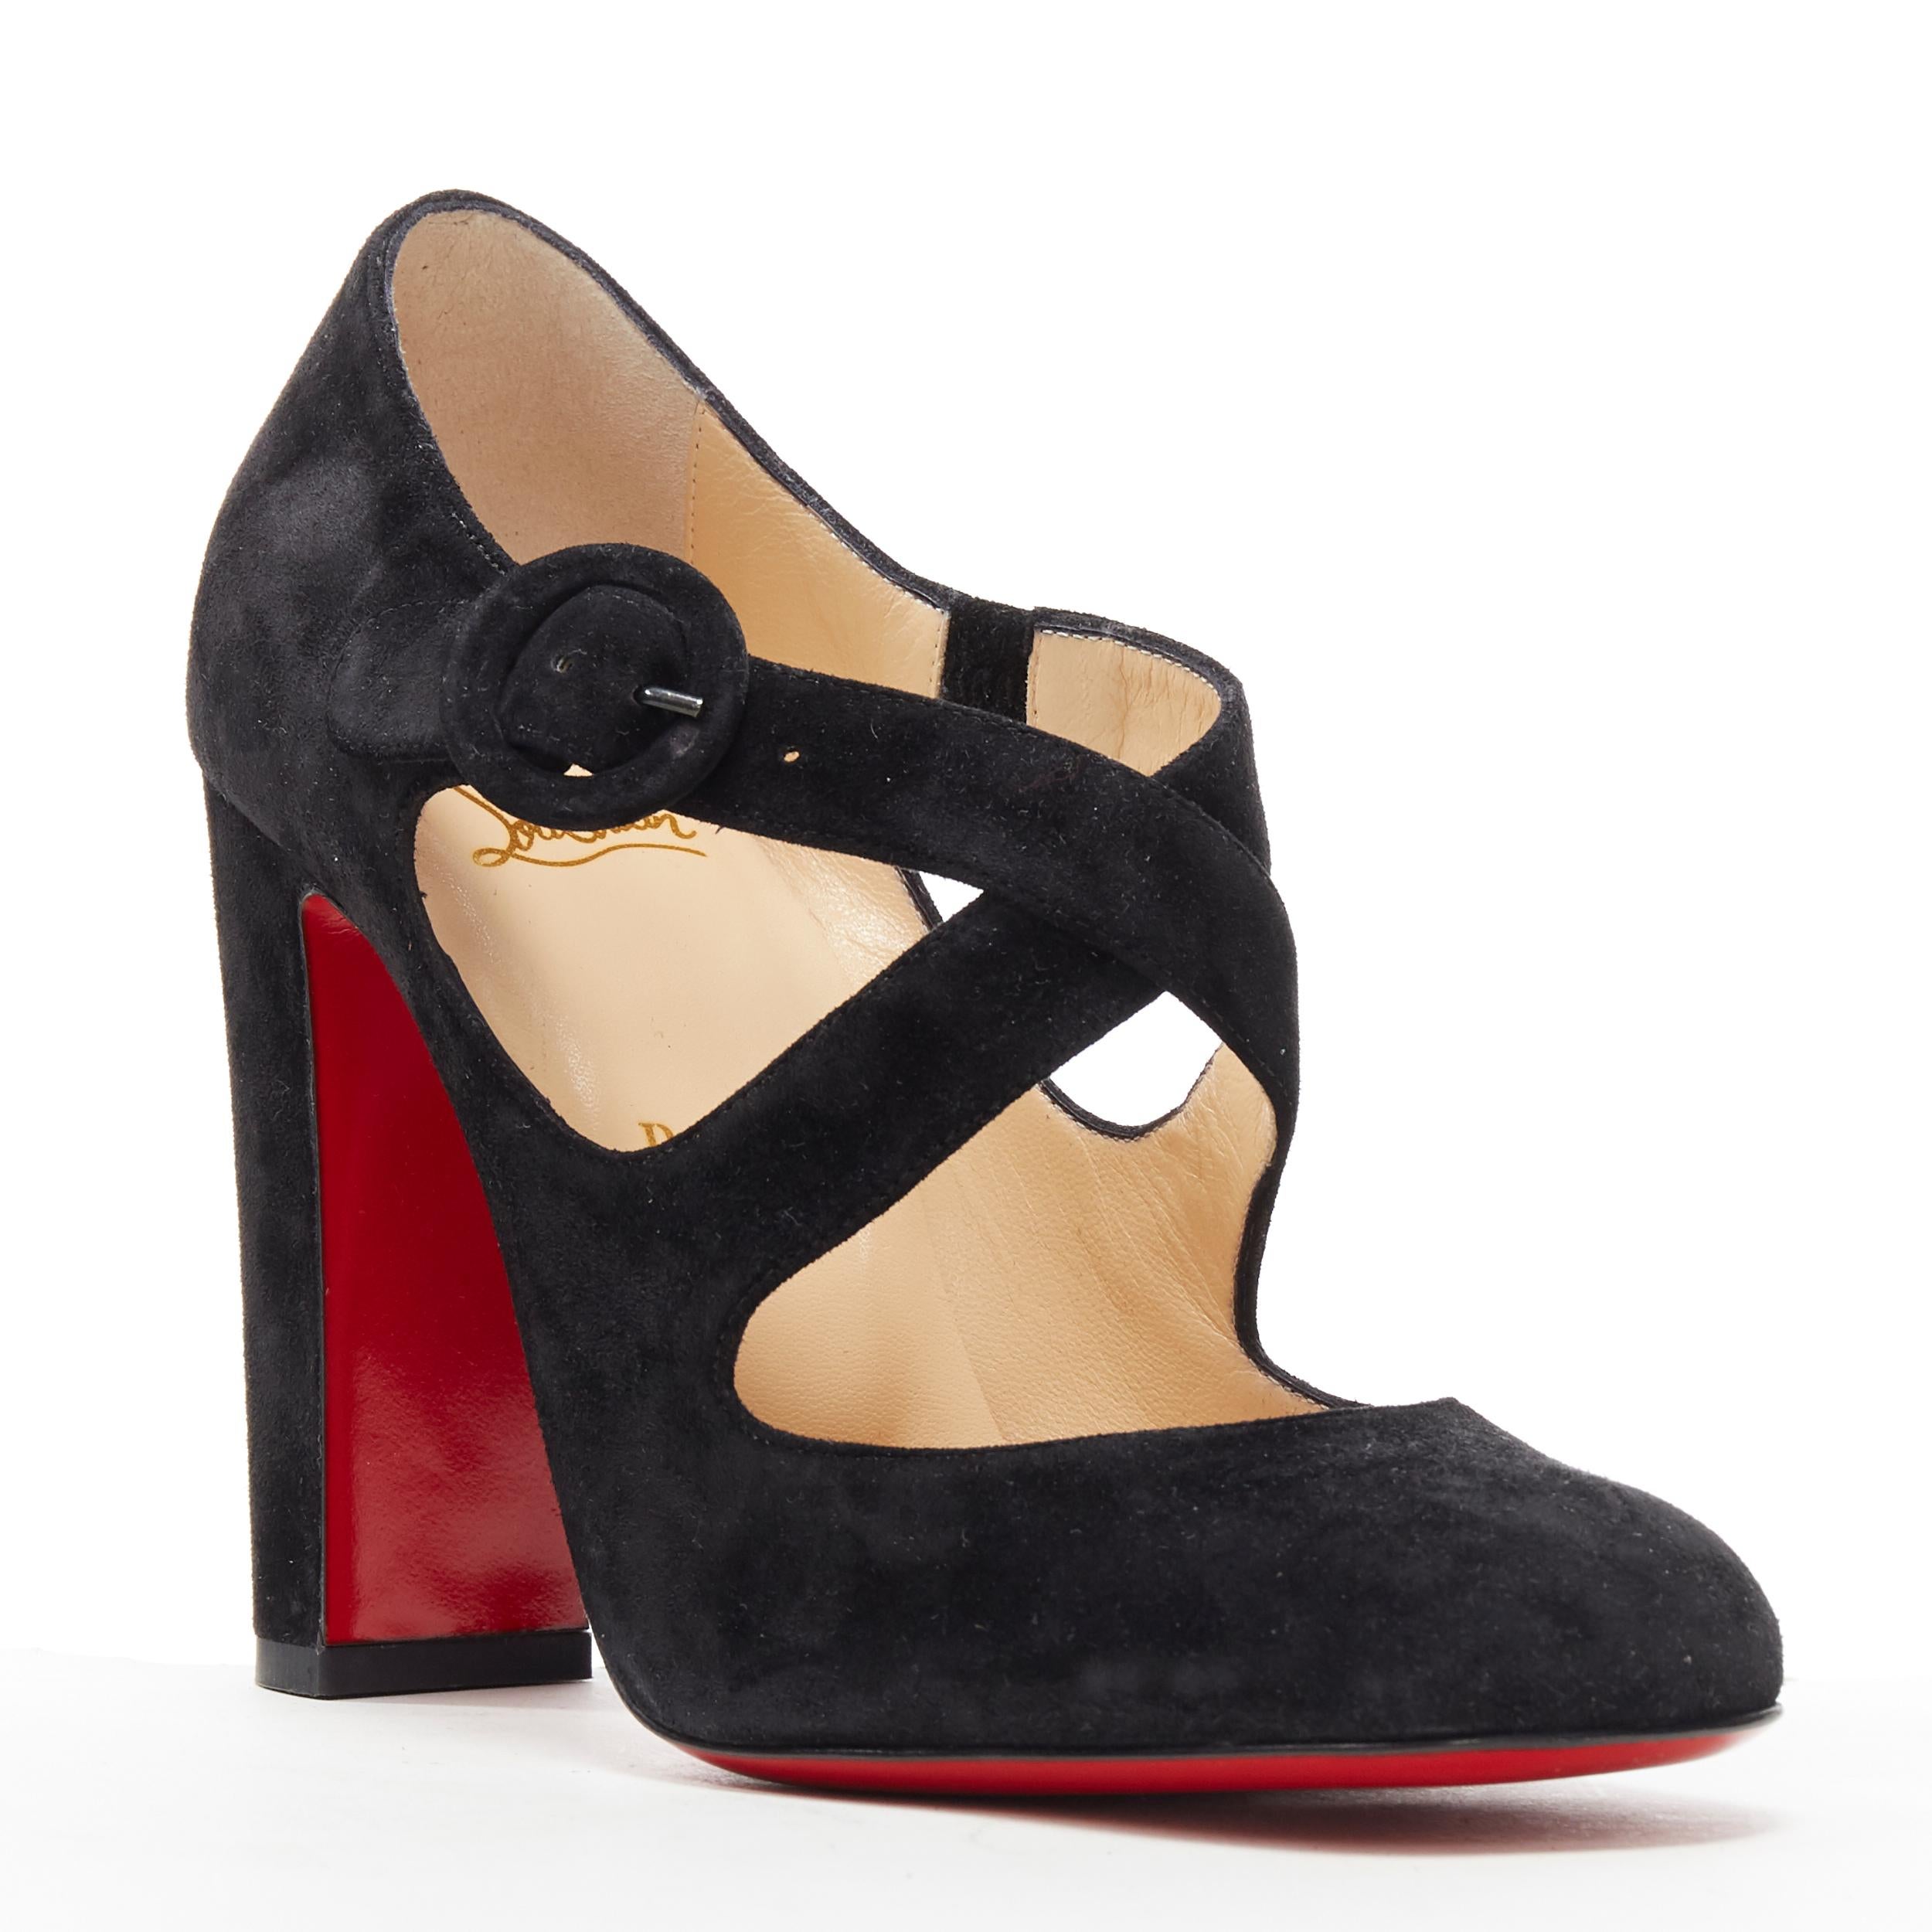 new CHRISTIAN LOUBOUTIN Miss Ellen black suede cross strap chunky heel pump EU37
Brand: Christian Louboutin
Designer: Christian Louboutin
Model Name / Style: Miss Ellen
Material: Suede
Color: Black
Pattern: Solid
Closure: Ankle strap
Extra Detail: